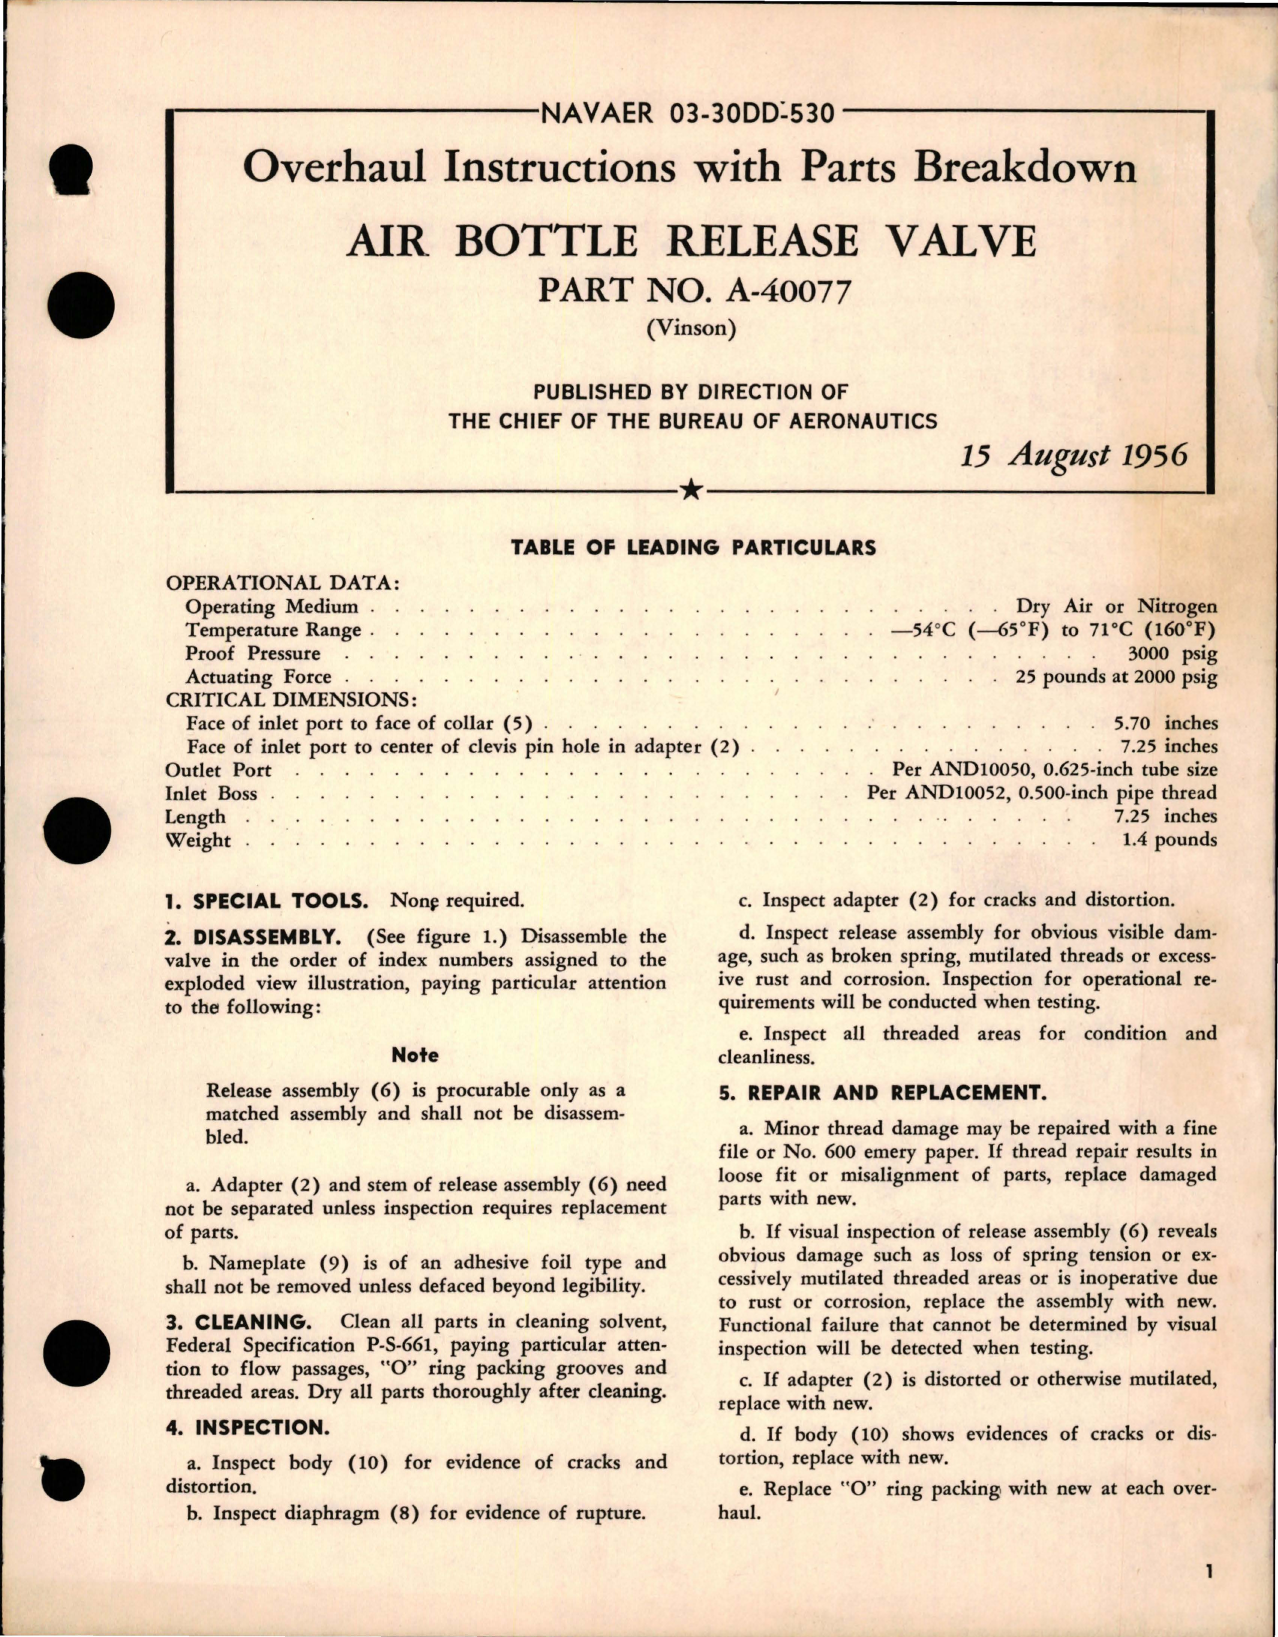 Sample page 1 from AirCorps Library document: Overhaul Instructions with Parts for Air Bottle Release Valve - Part A-40077 